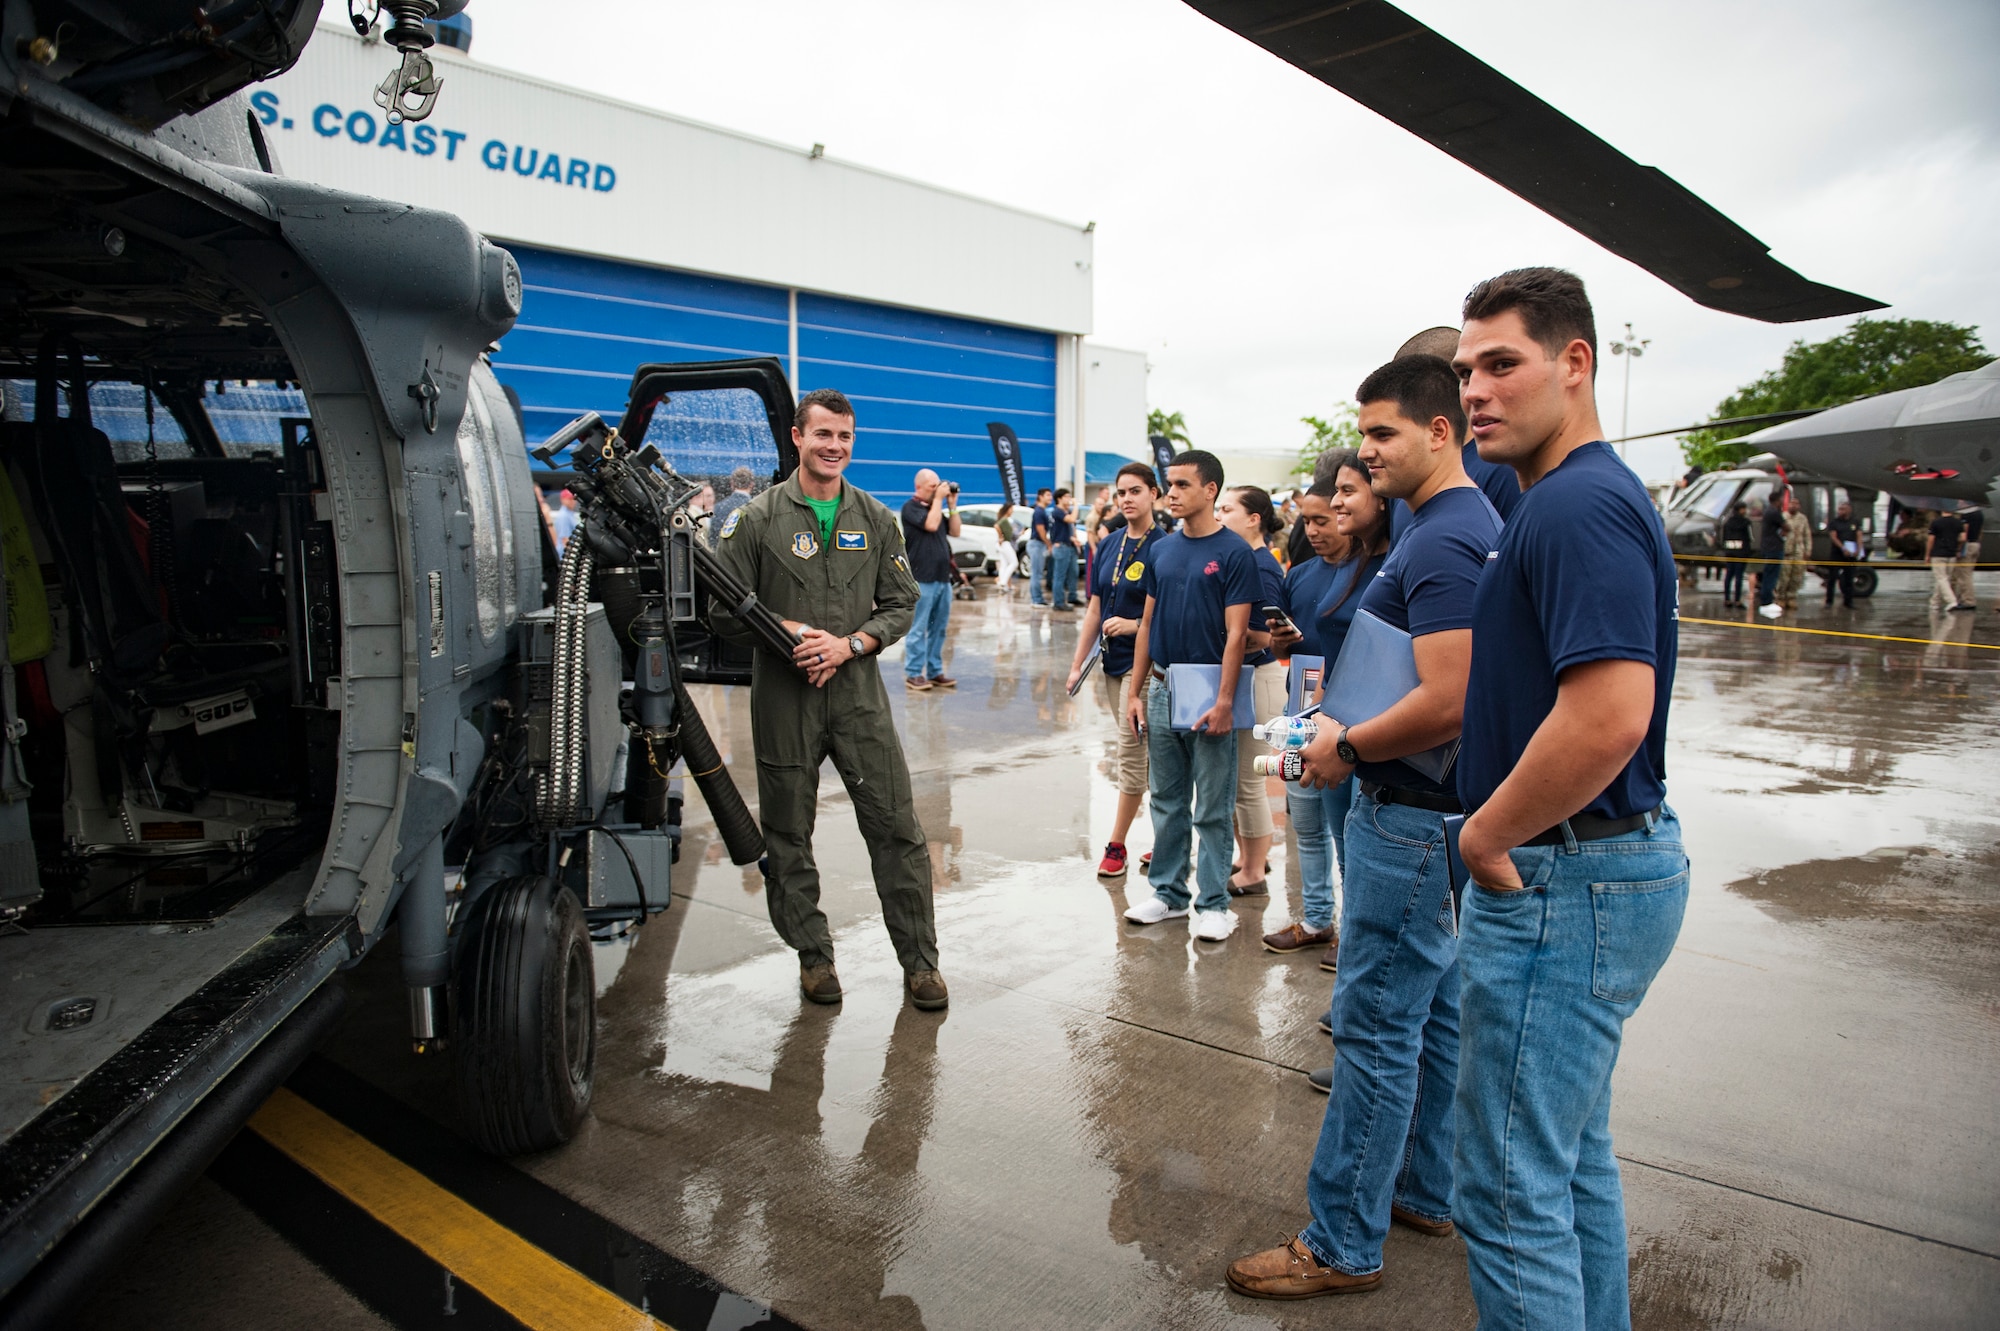 Air Force Reserve Citizen Airman 1st Lt. Andy Deck from the 301st Rescue Squadron out of Patrick Air Force Base in Cocoa Beach, Florida, talks to a group of future servicemembers, May 25th, 2018, at Miami, after a practice run for the 2nd annual Salute to American Heroes Air and Sea Show over Miami Beach, Florida. This two-day event showcases military fighter jets and other aircraft and equipment from all branches of the United States military in observance of Memorial Day, honoring servicemembers who have made the ultimate sacrifice. (U.S. Air Force photo/Staff Sgt. Jared Trimarchi)